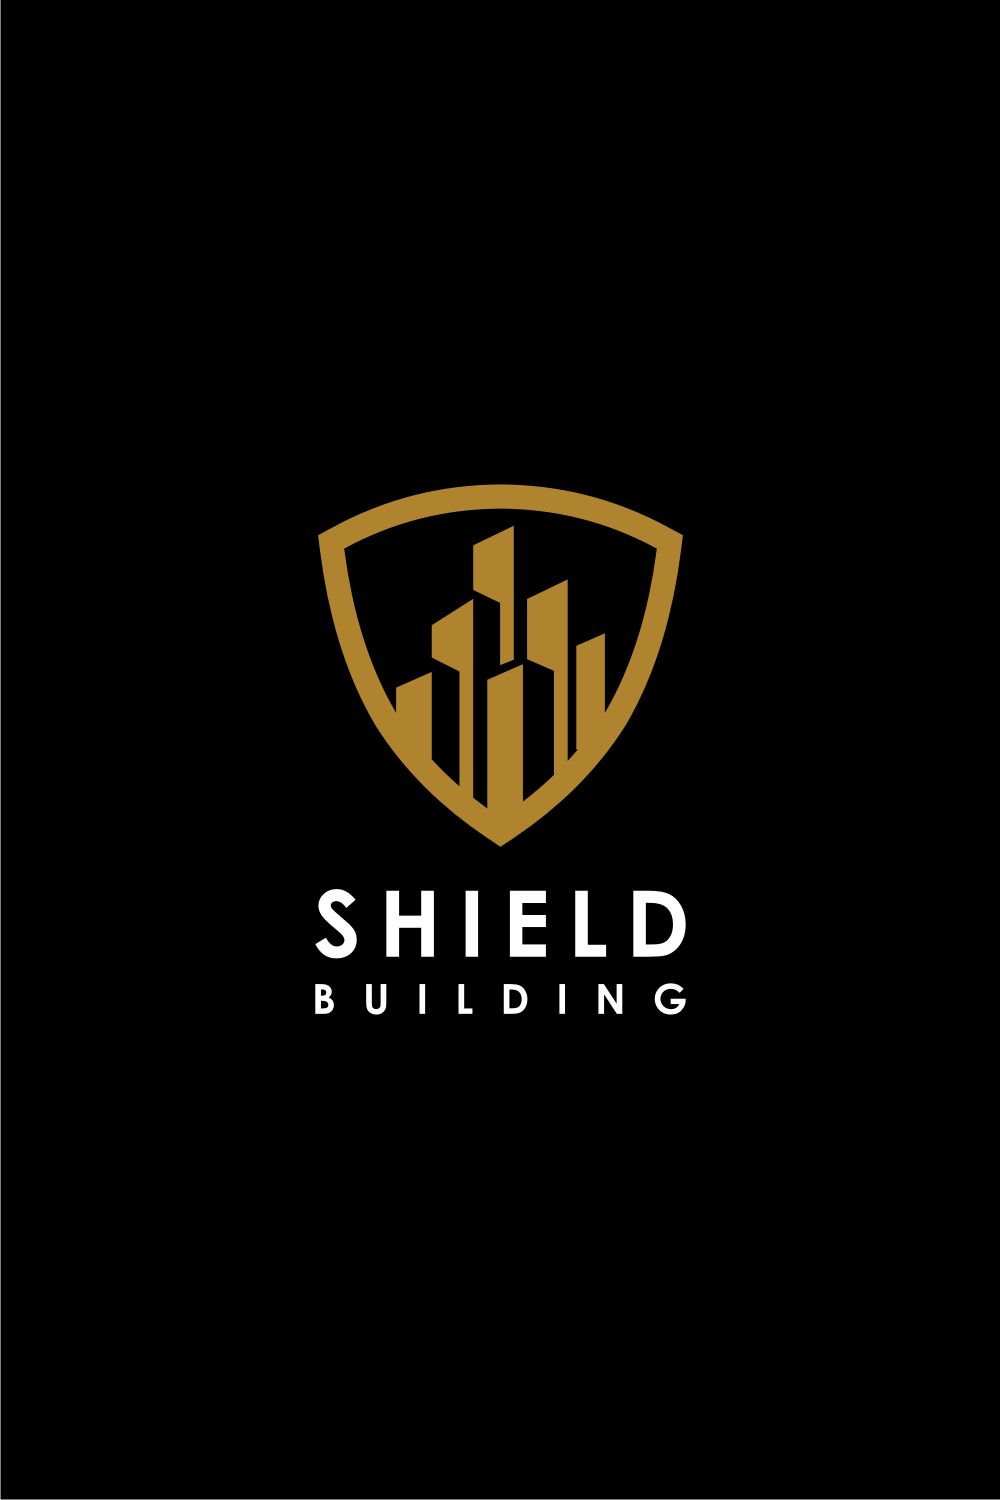 Building and Shield Line Style Logo pinterest image.